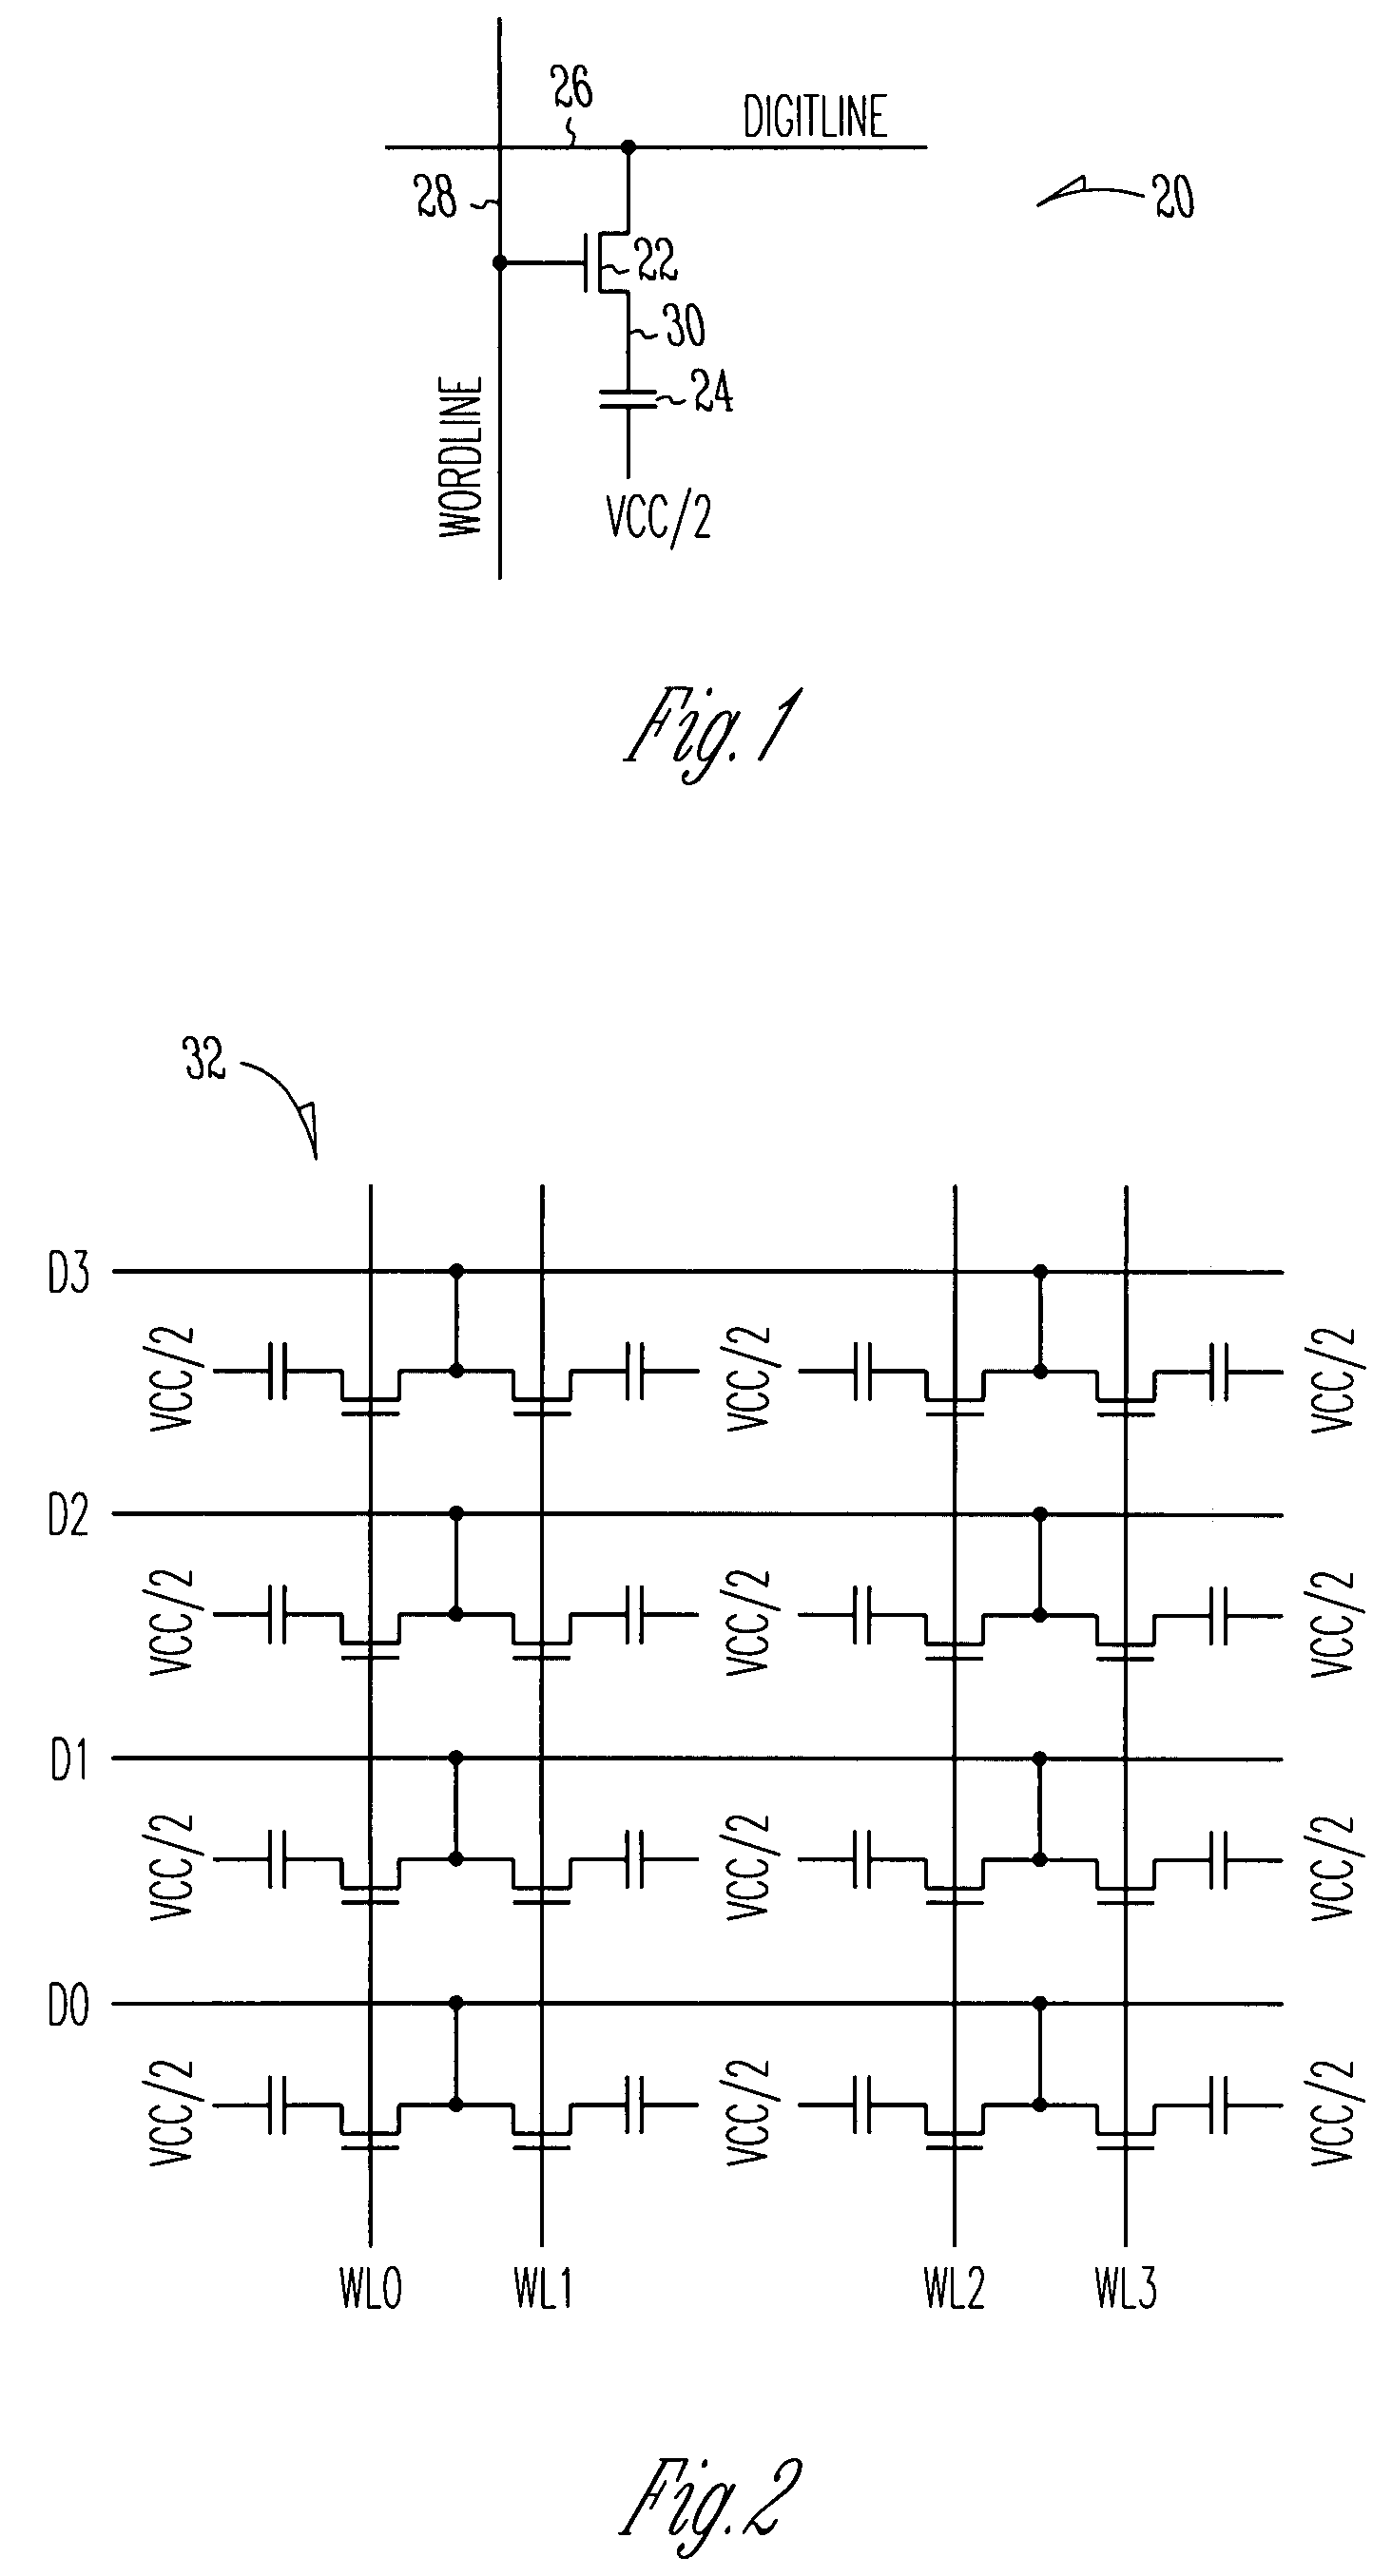 Memory array error correction apparatus, systems, and methods